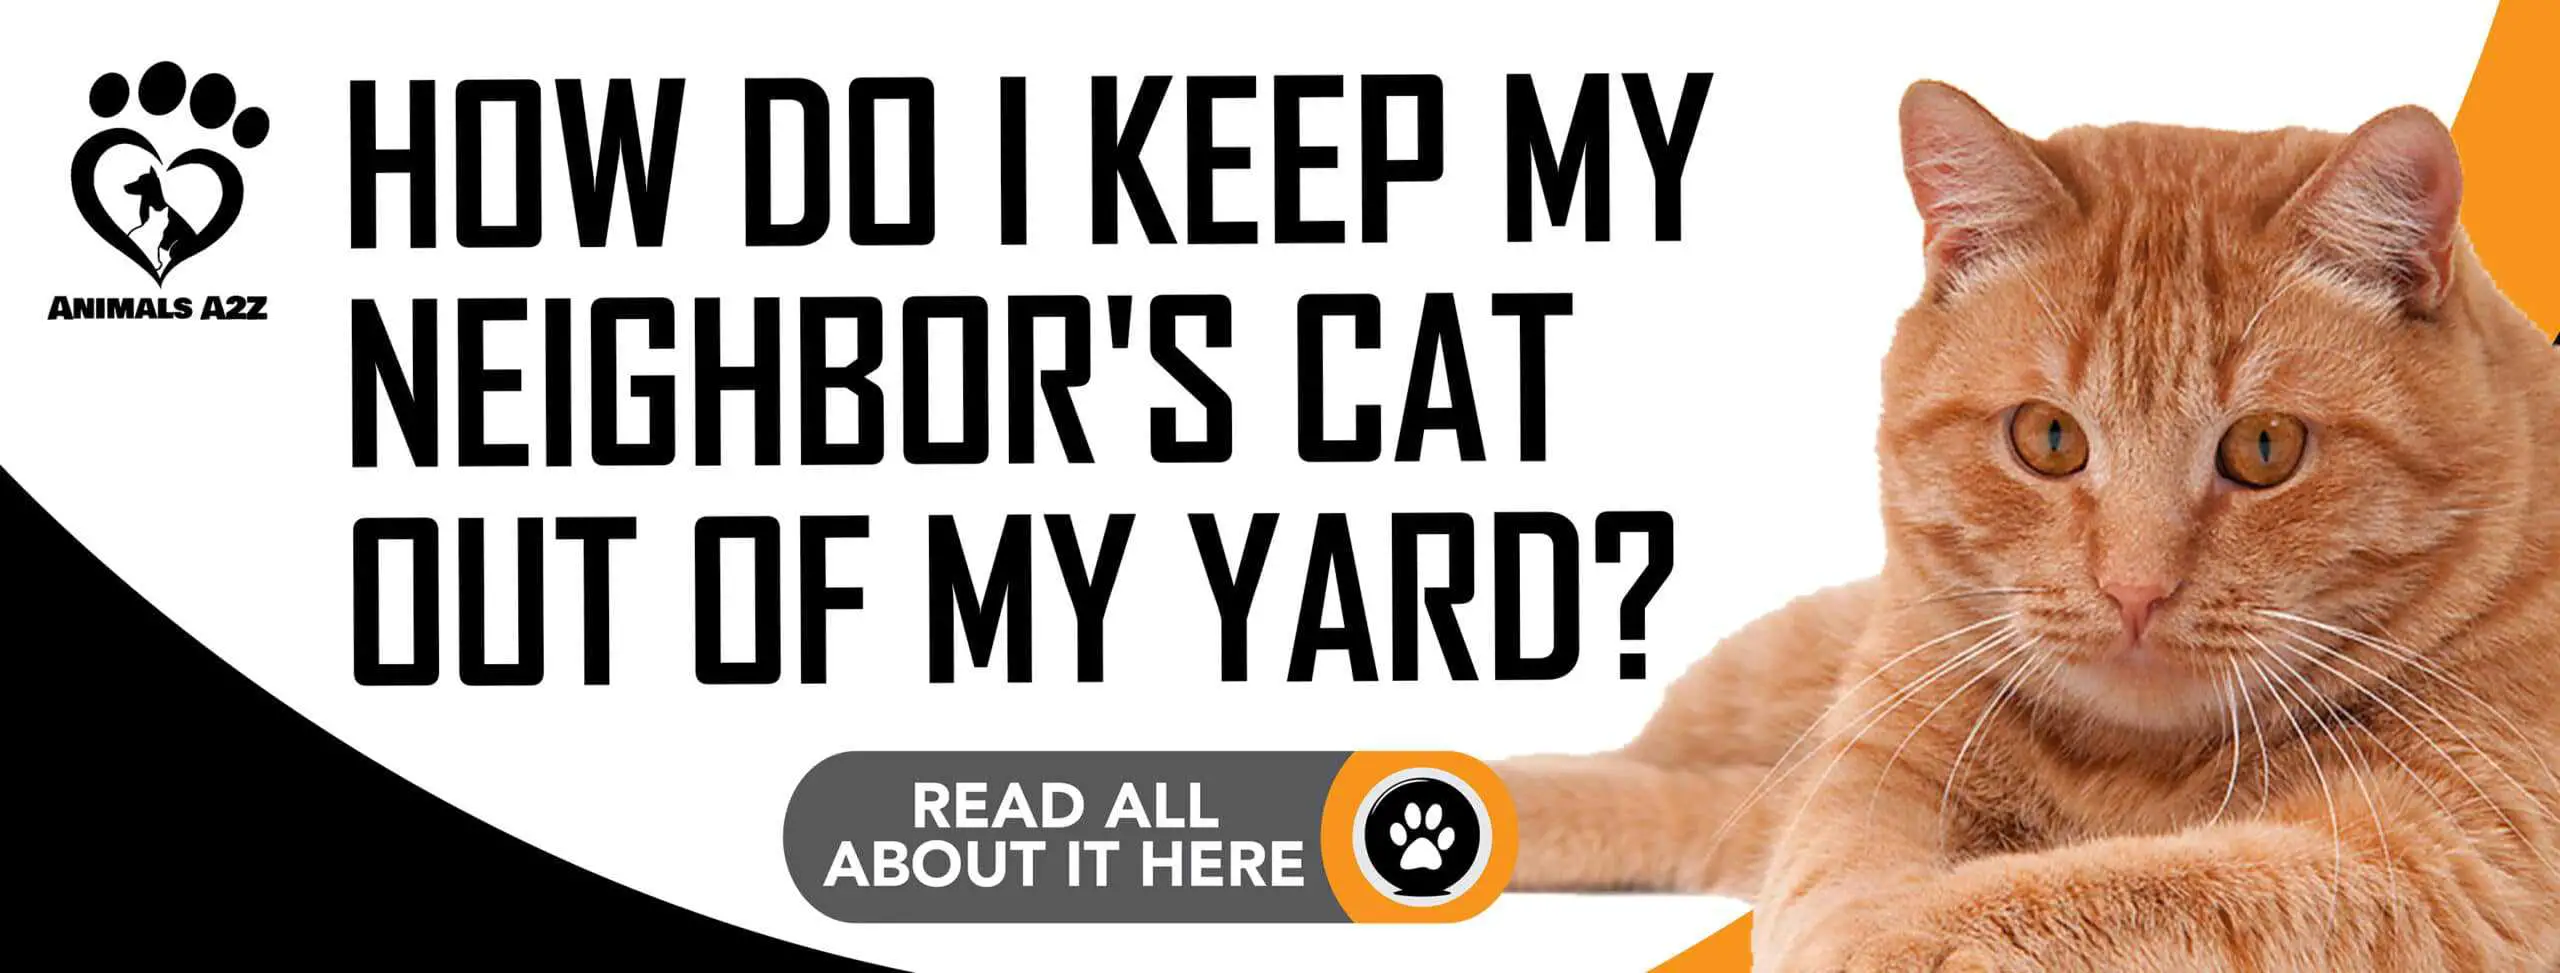 How do I keep my neighbor's cat out of my yard?